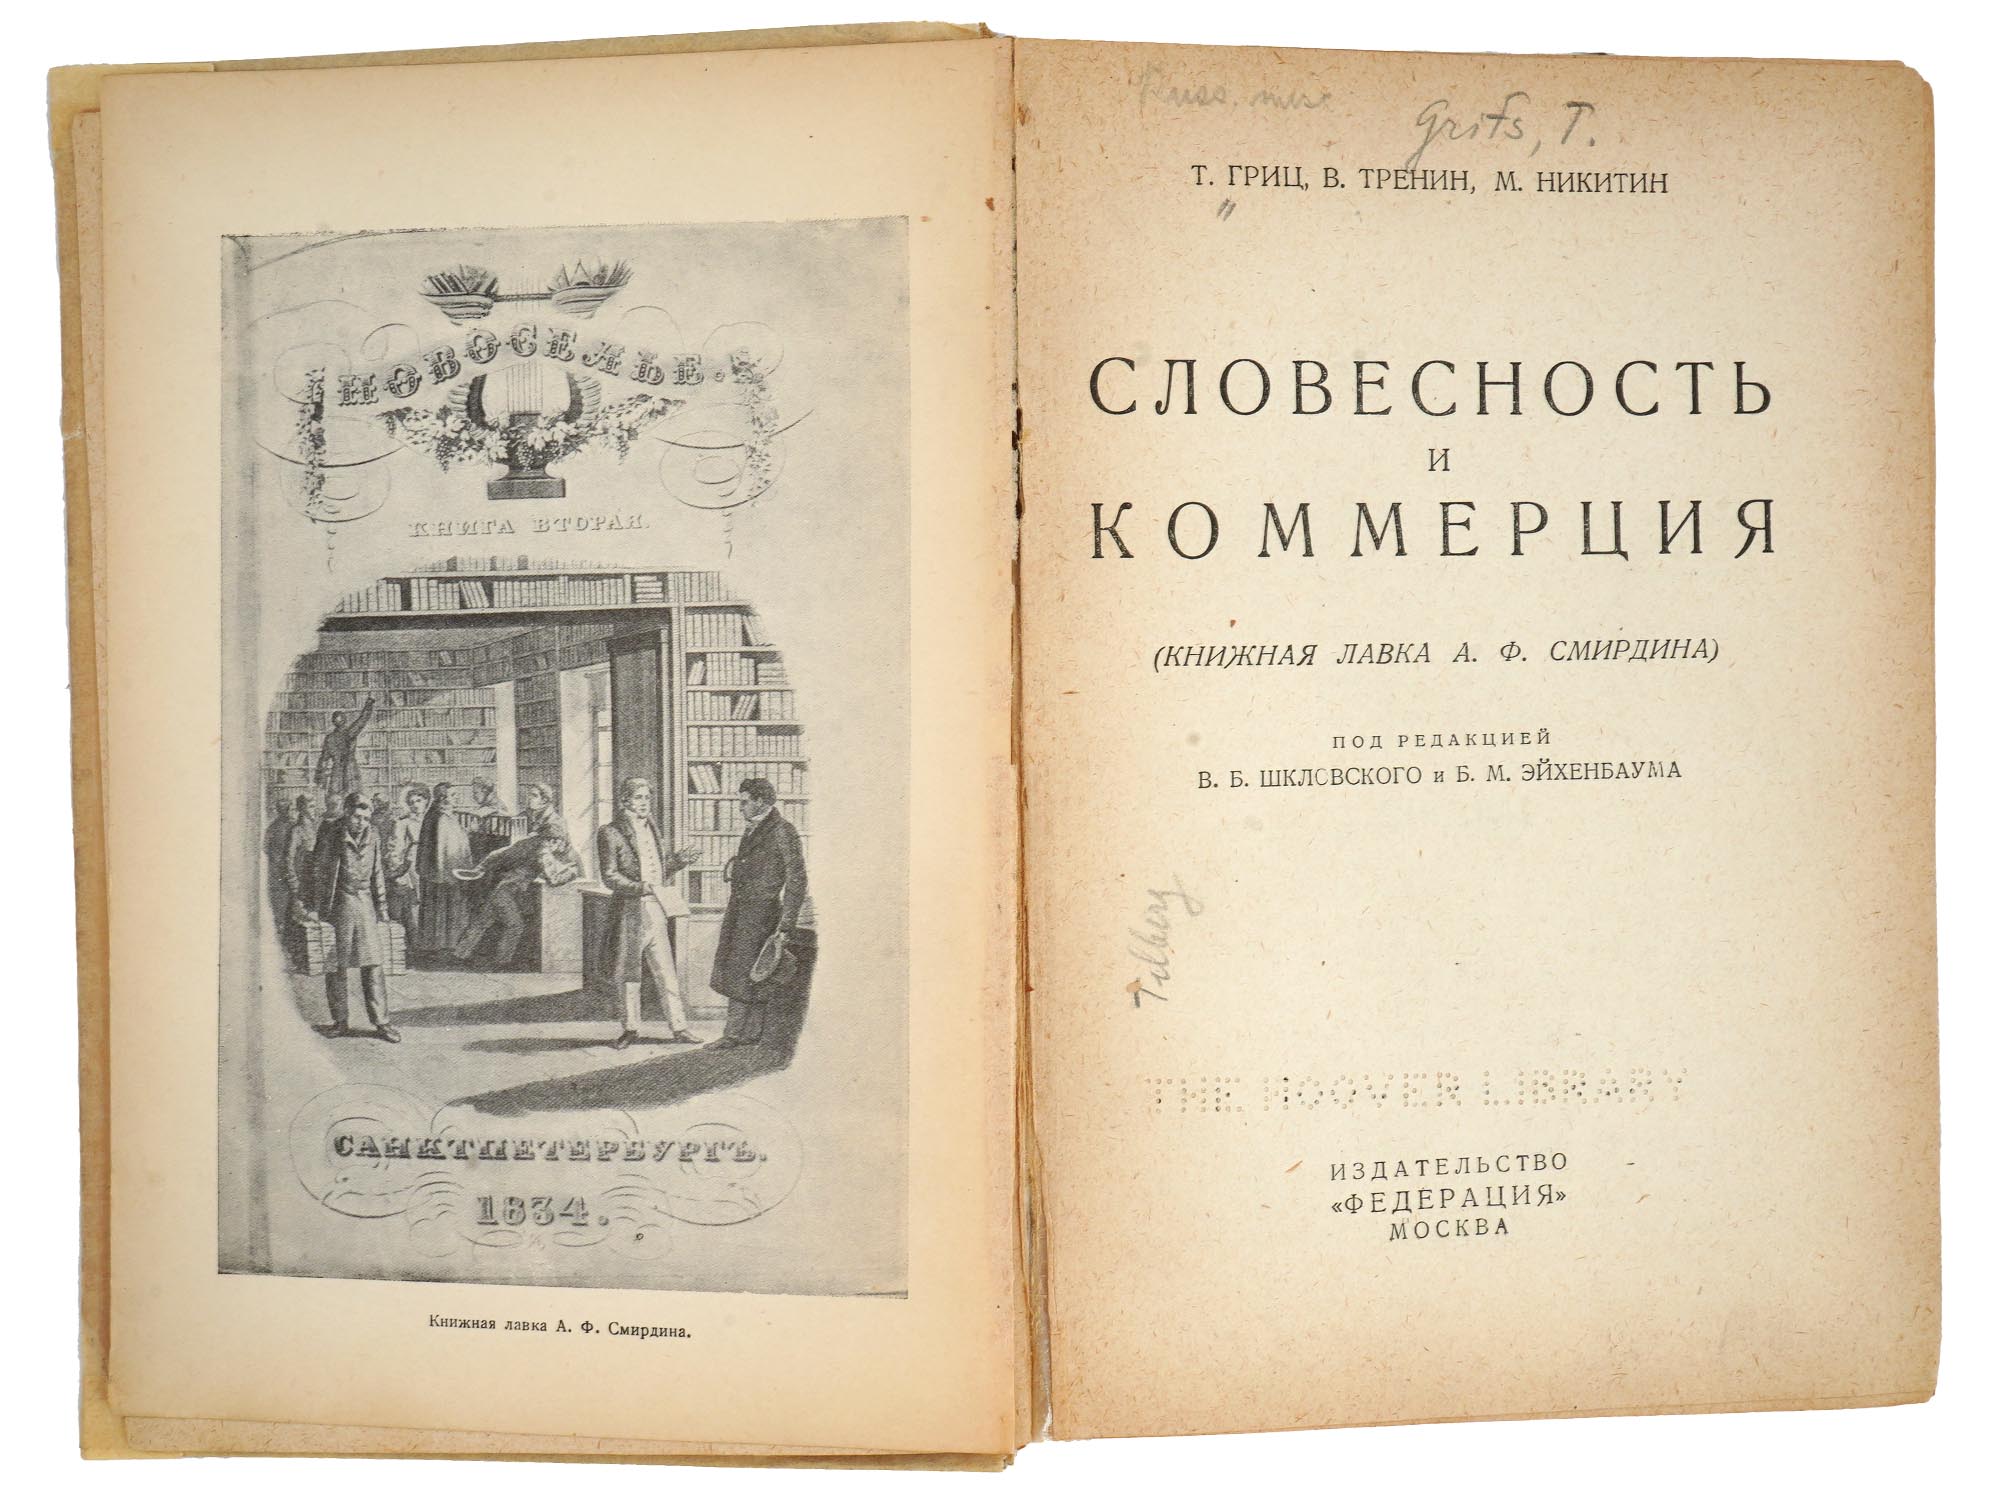 ANTIQUE AND VINTAGE RUSSIAN BOOK EDITIONS GRITZ ERBERG PIC-4